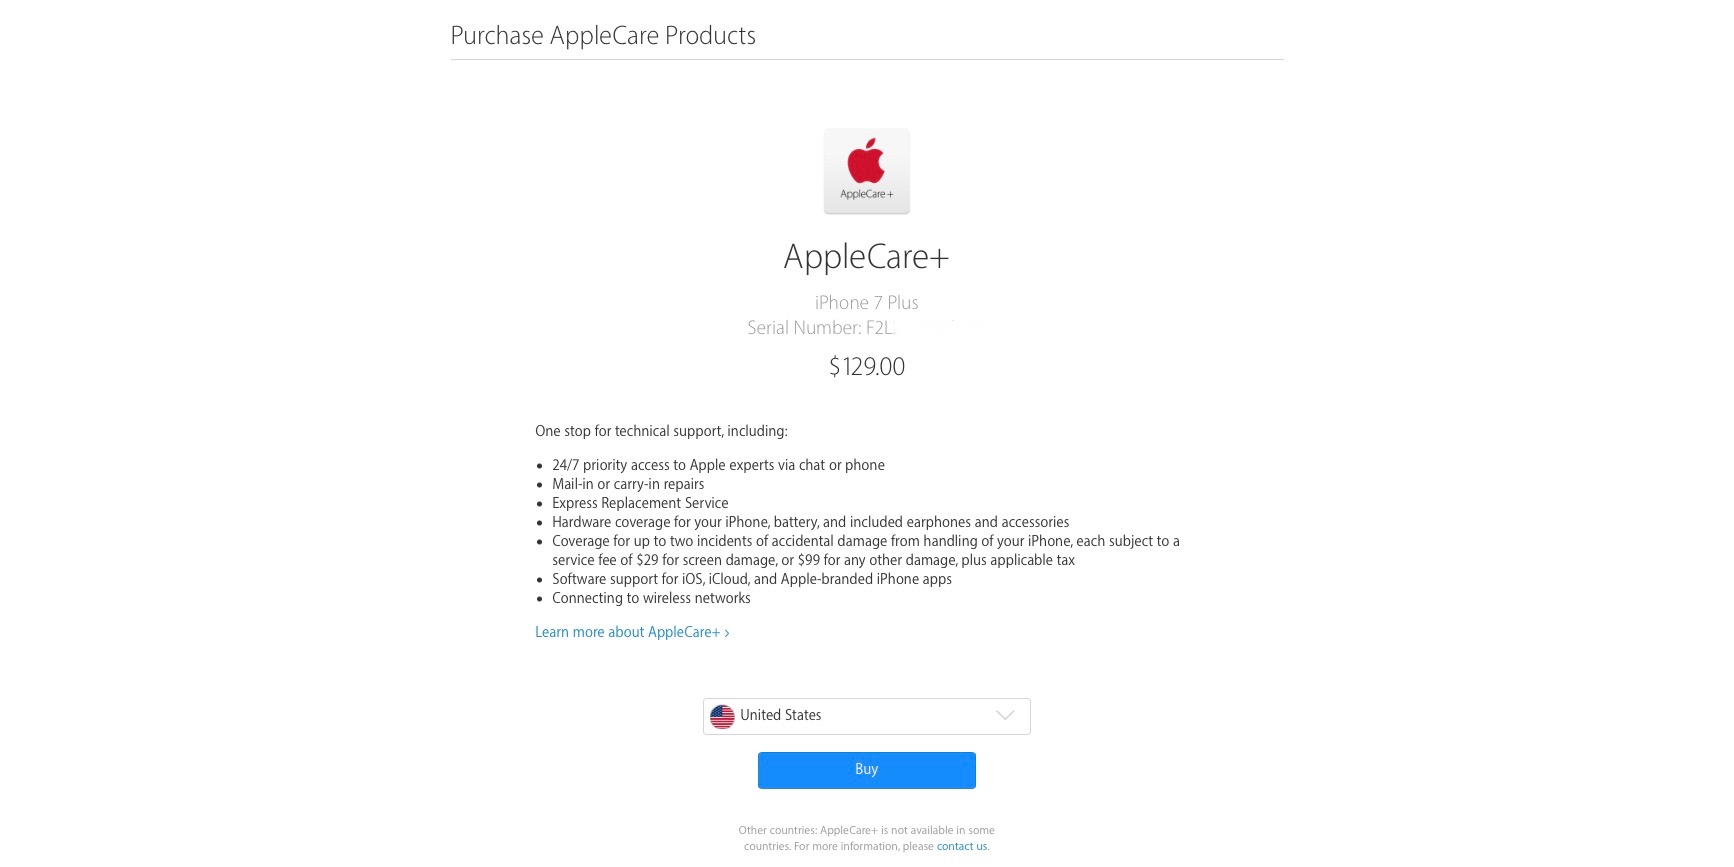 can i purchase applecare after purchase